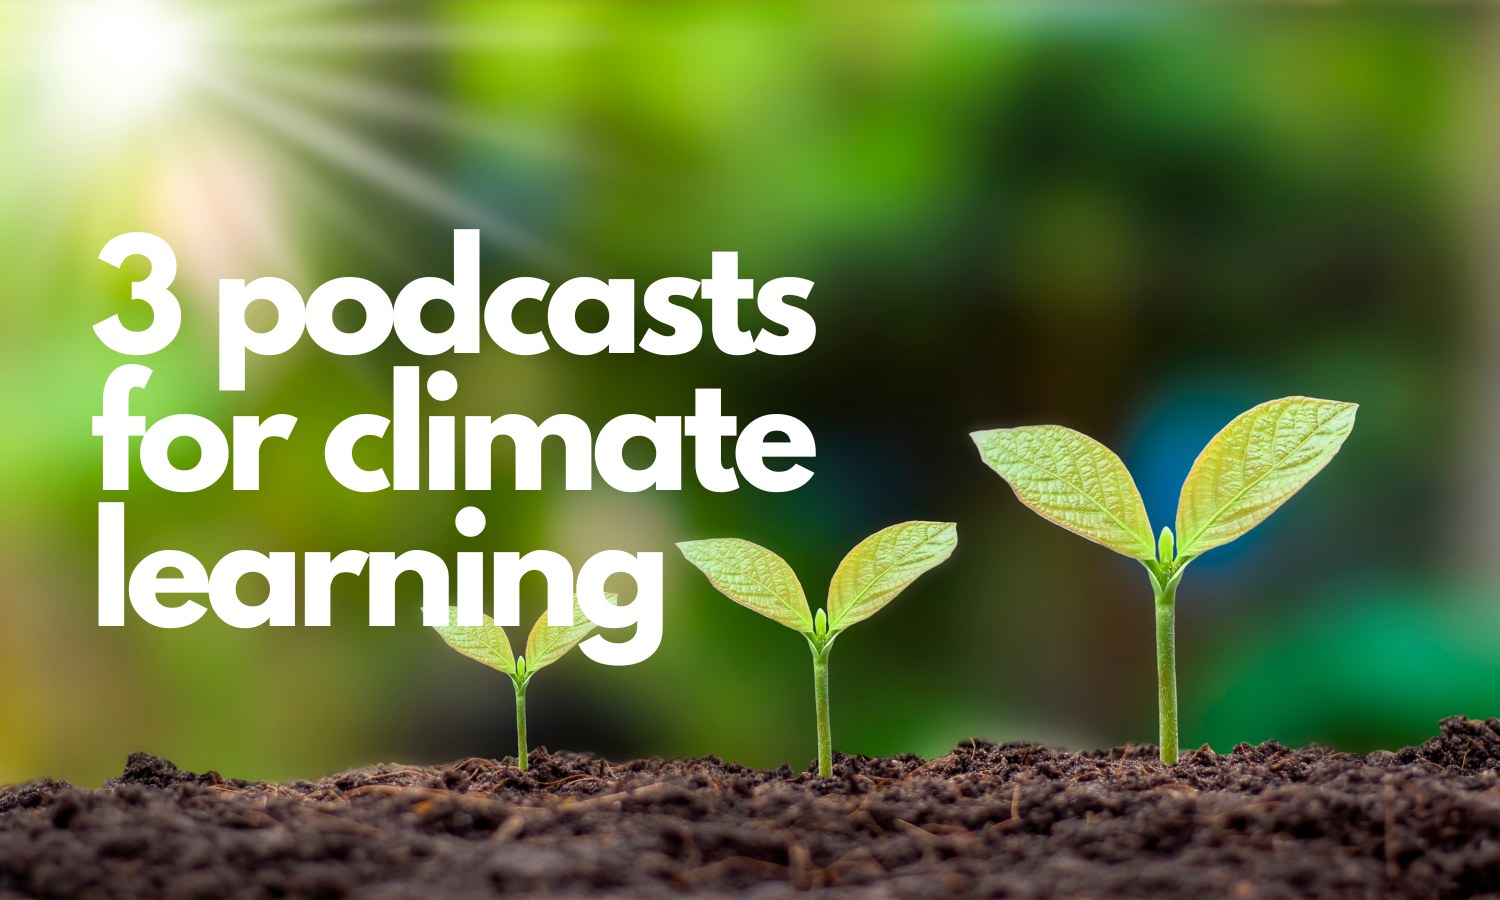 Three podcasts for climate learning